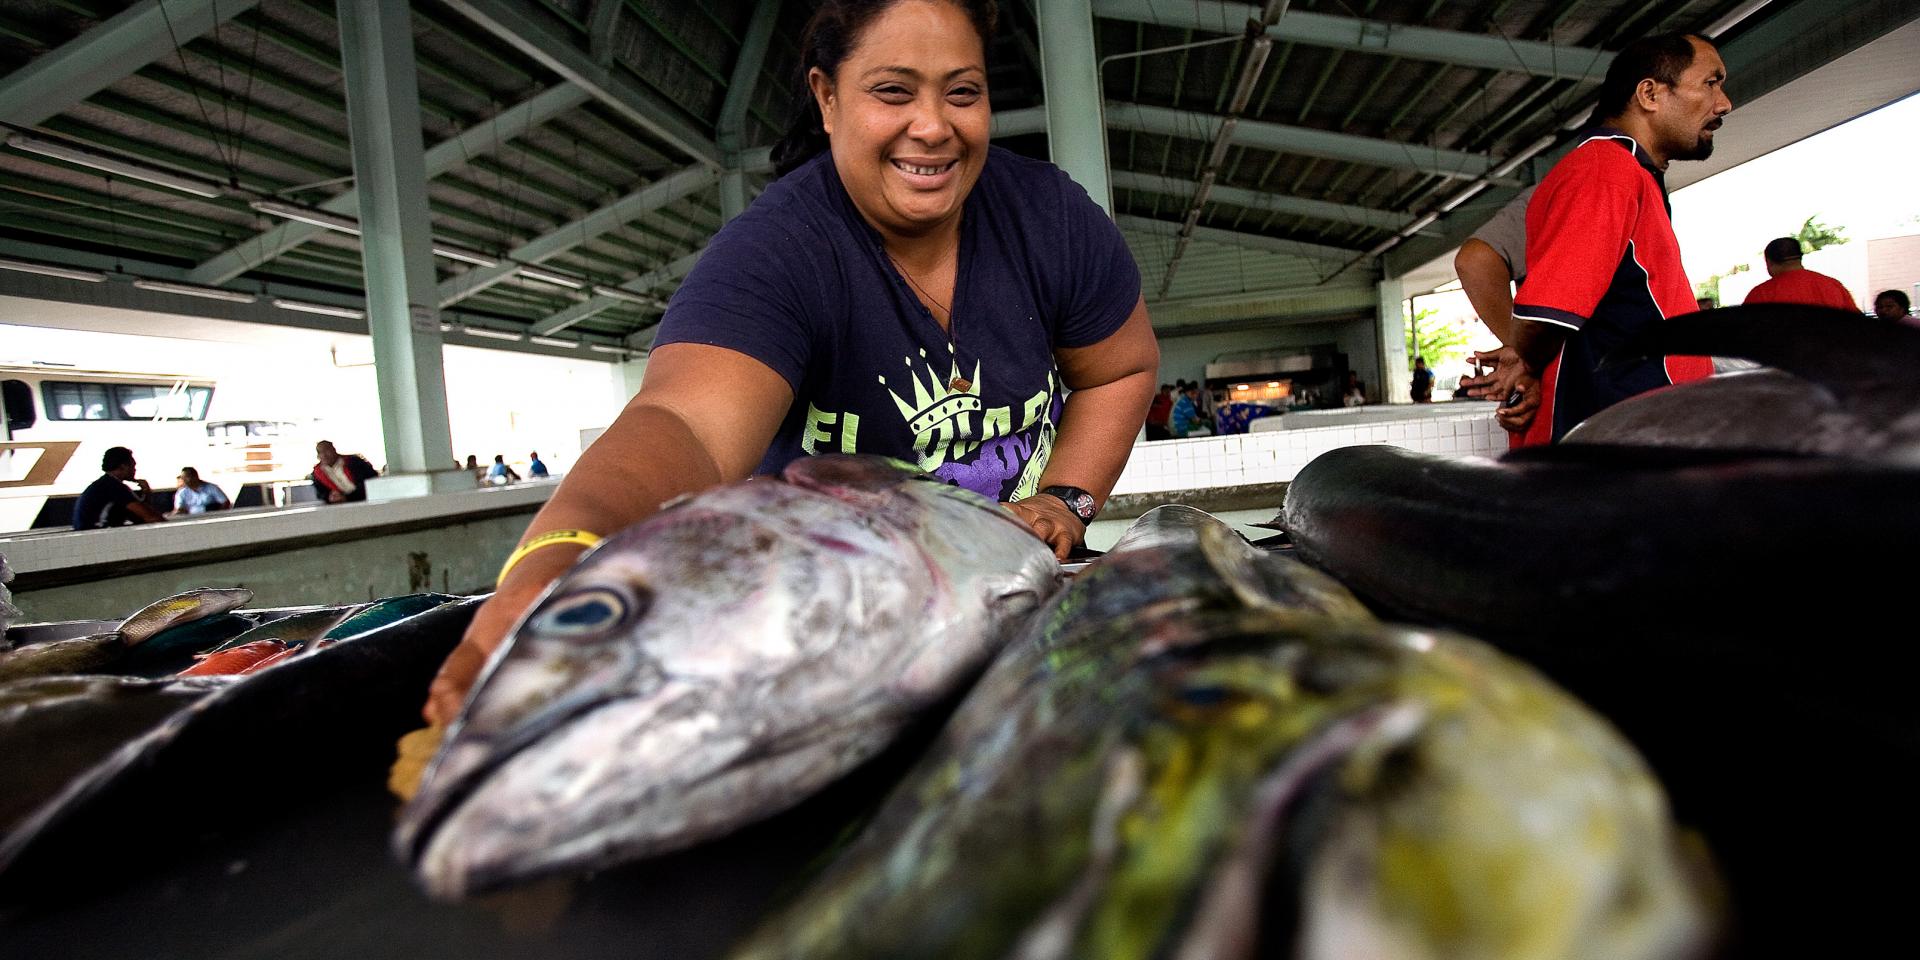 Fololina Avia received help through the Small Business Development Project to expand her "Lady Edwina" fishing company and stall at the Apia fish market.